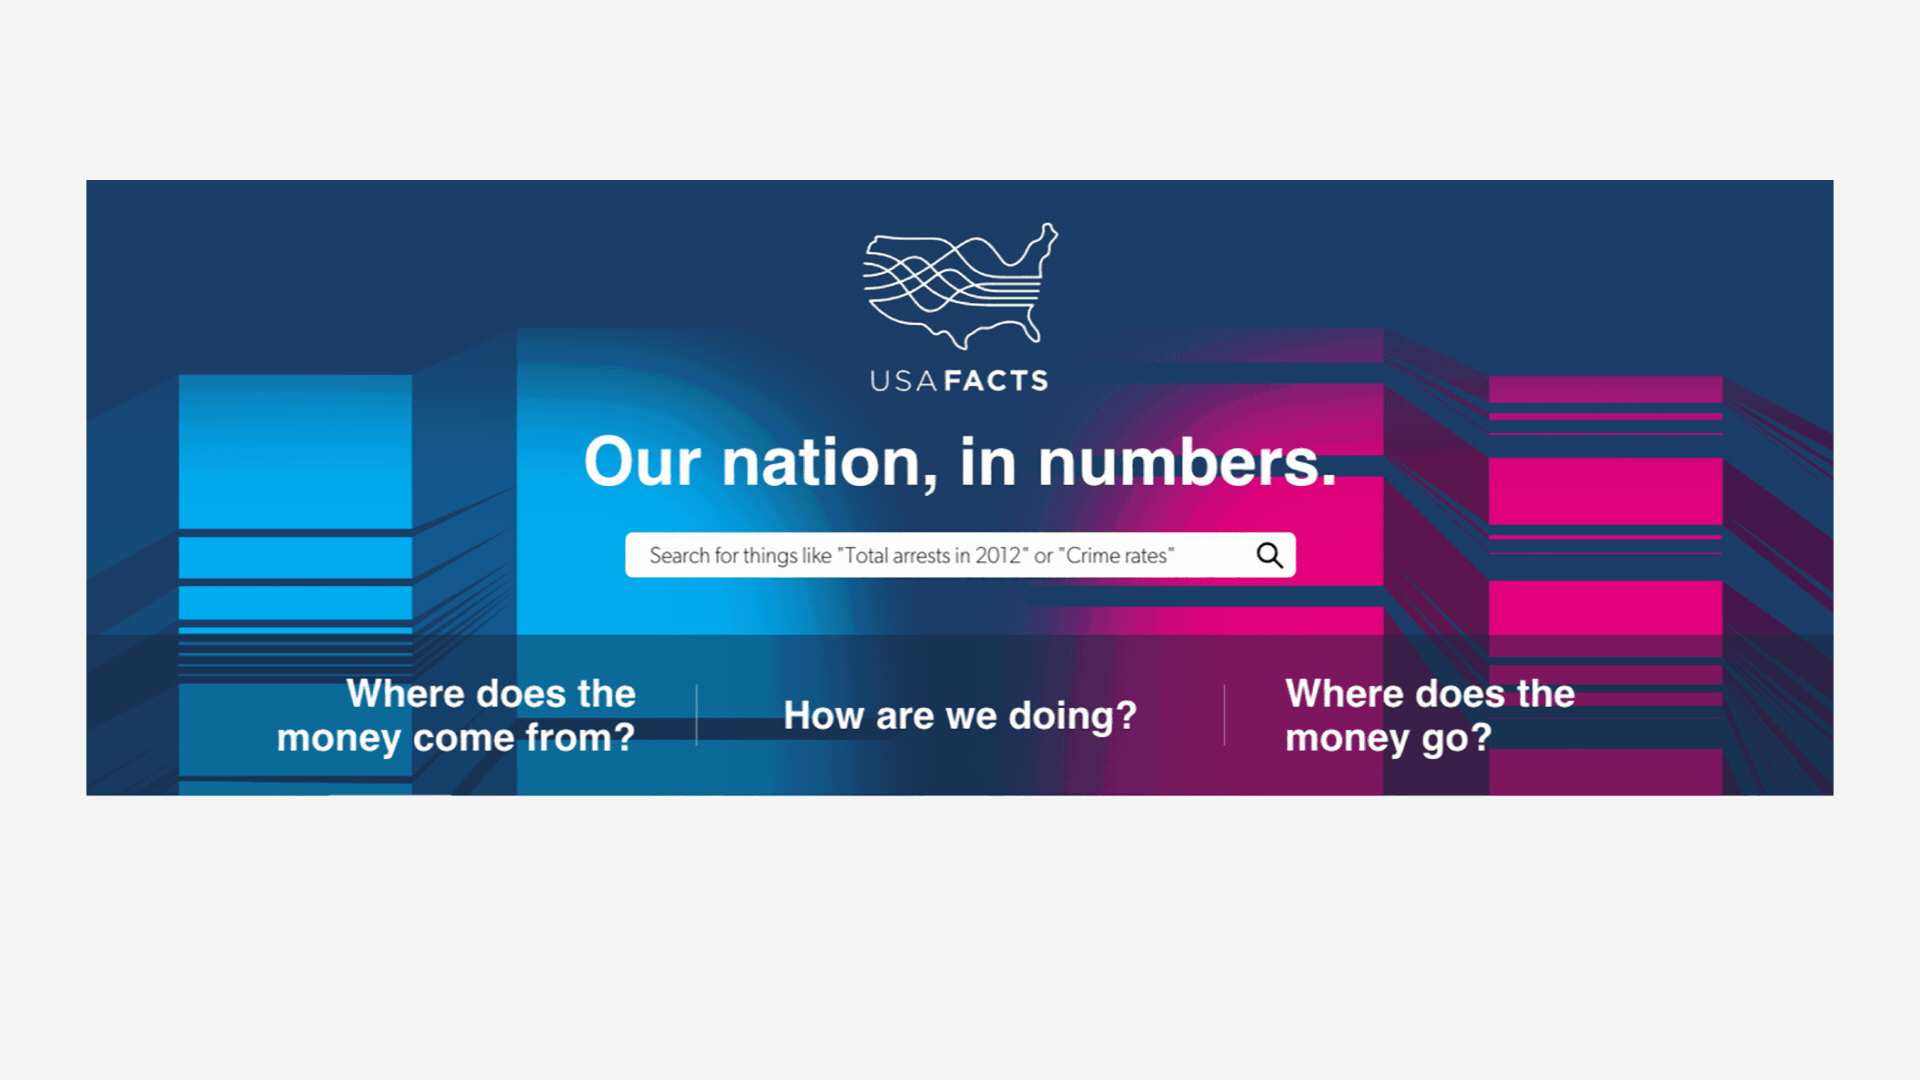 Animated GIF of USAFacts website header showing where the US government's money comes from and where it goes.